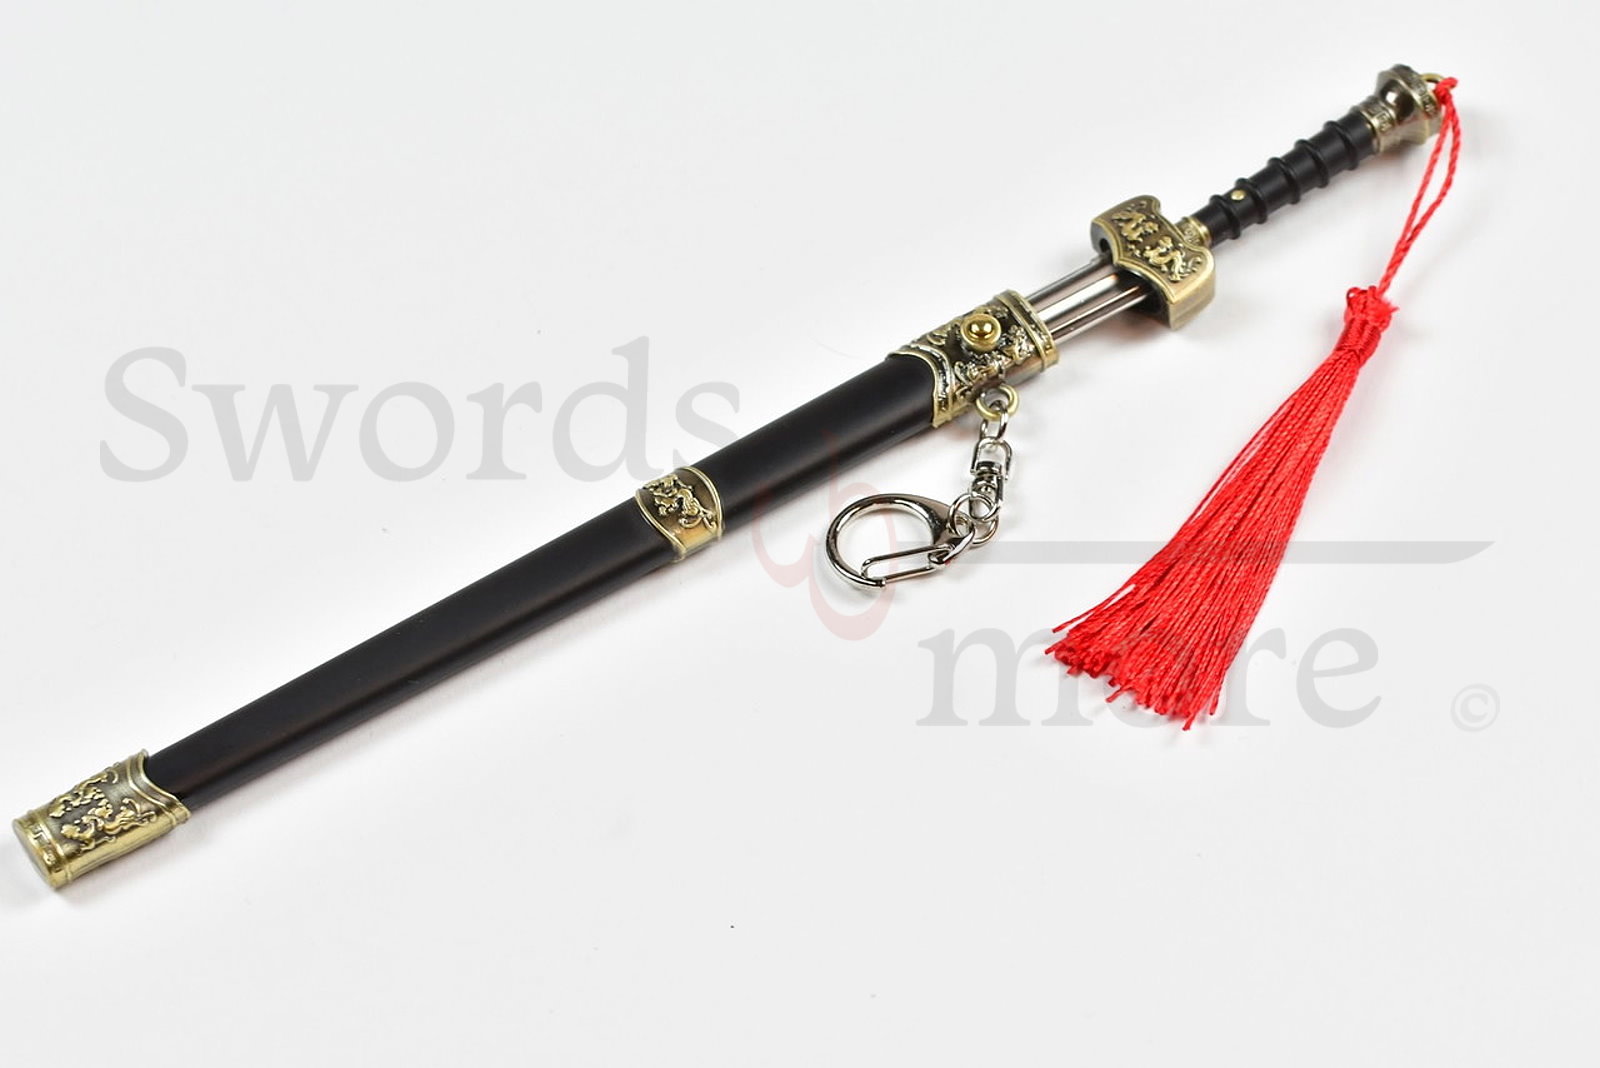 Tai Chi Sword - Kung Fu Jian Sword Letter Opener with Sheath and Stand 